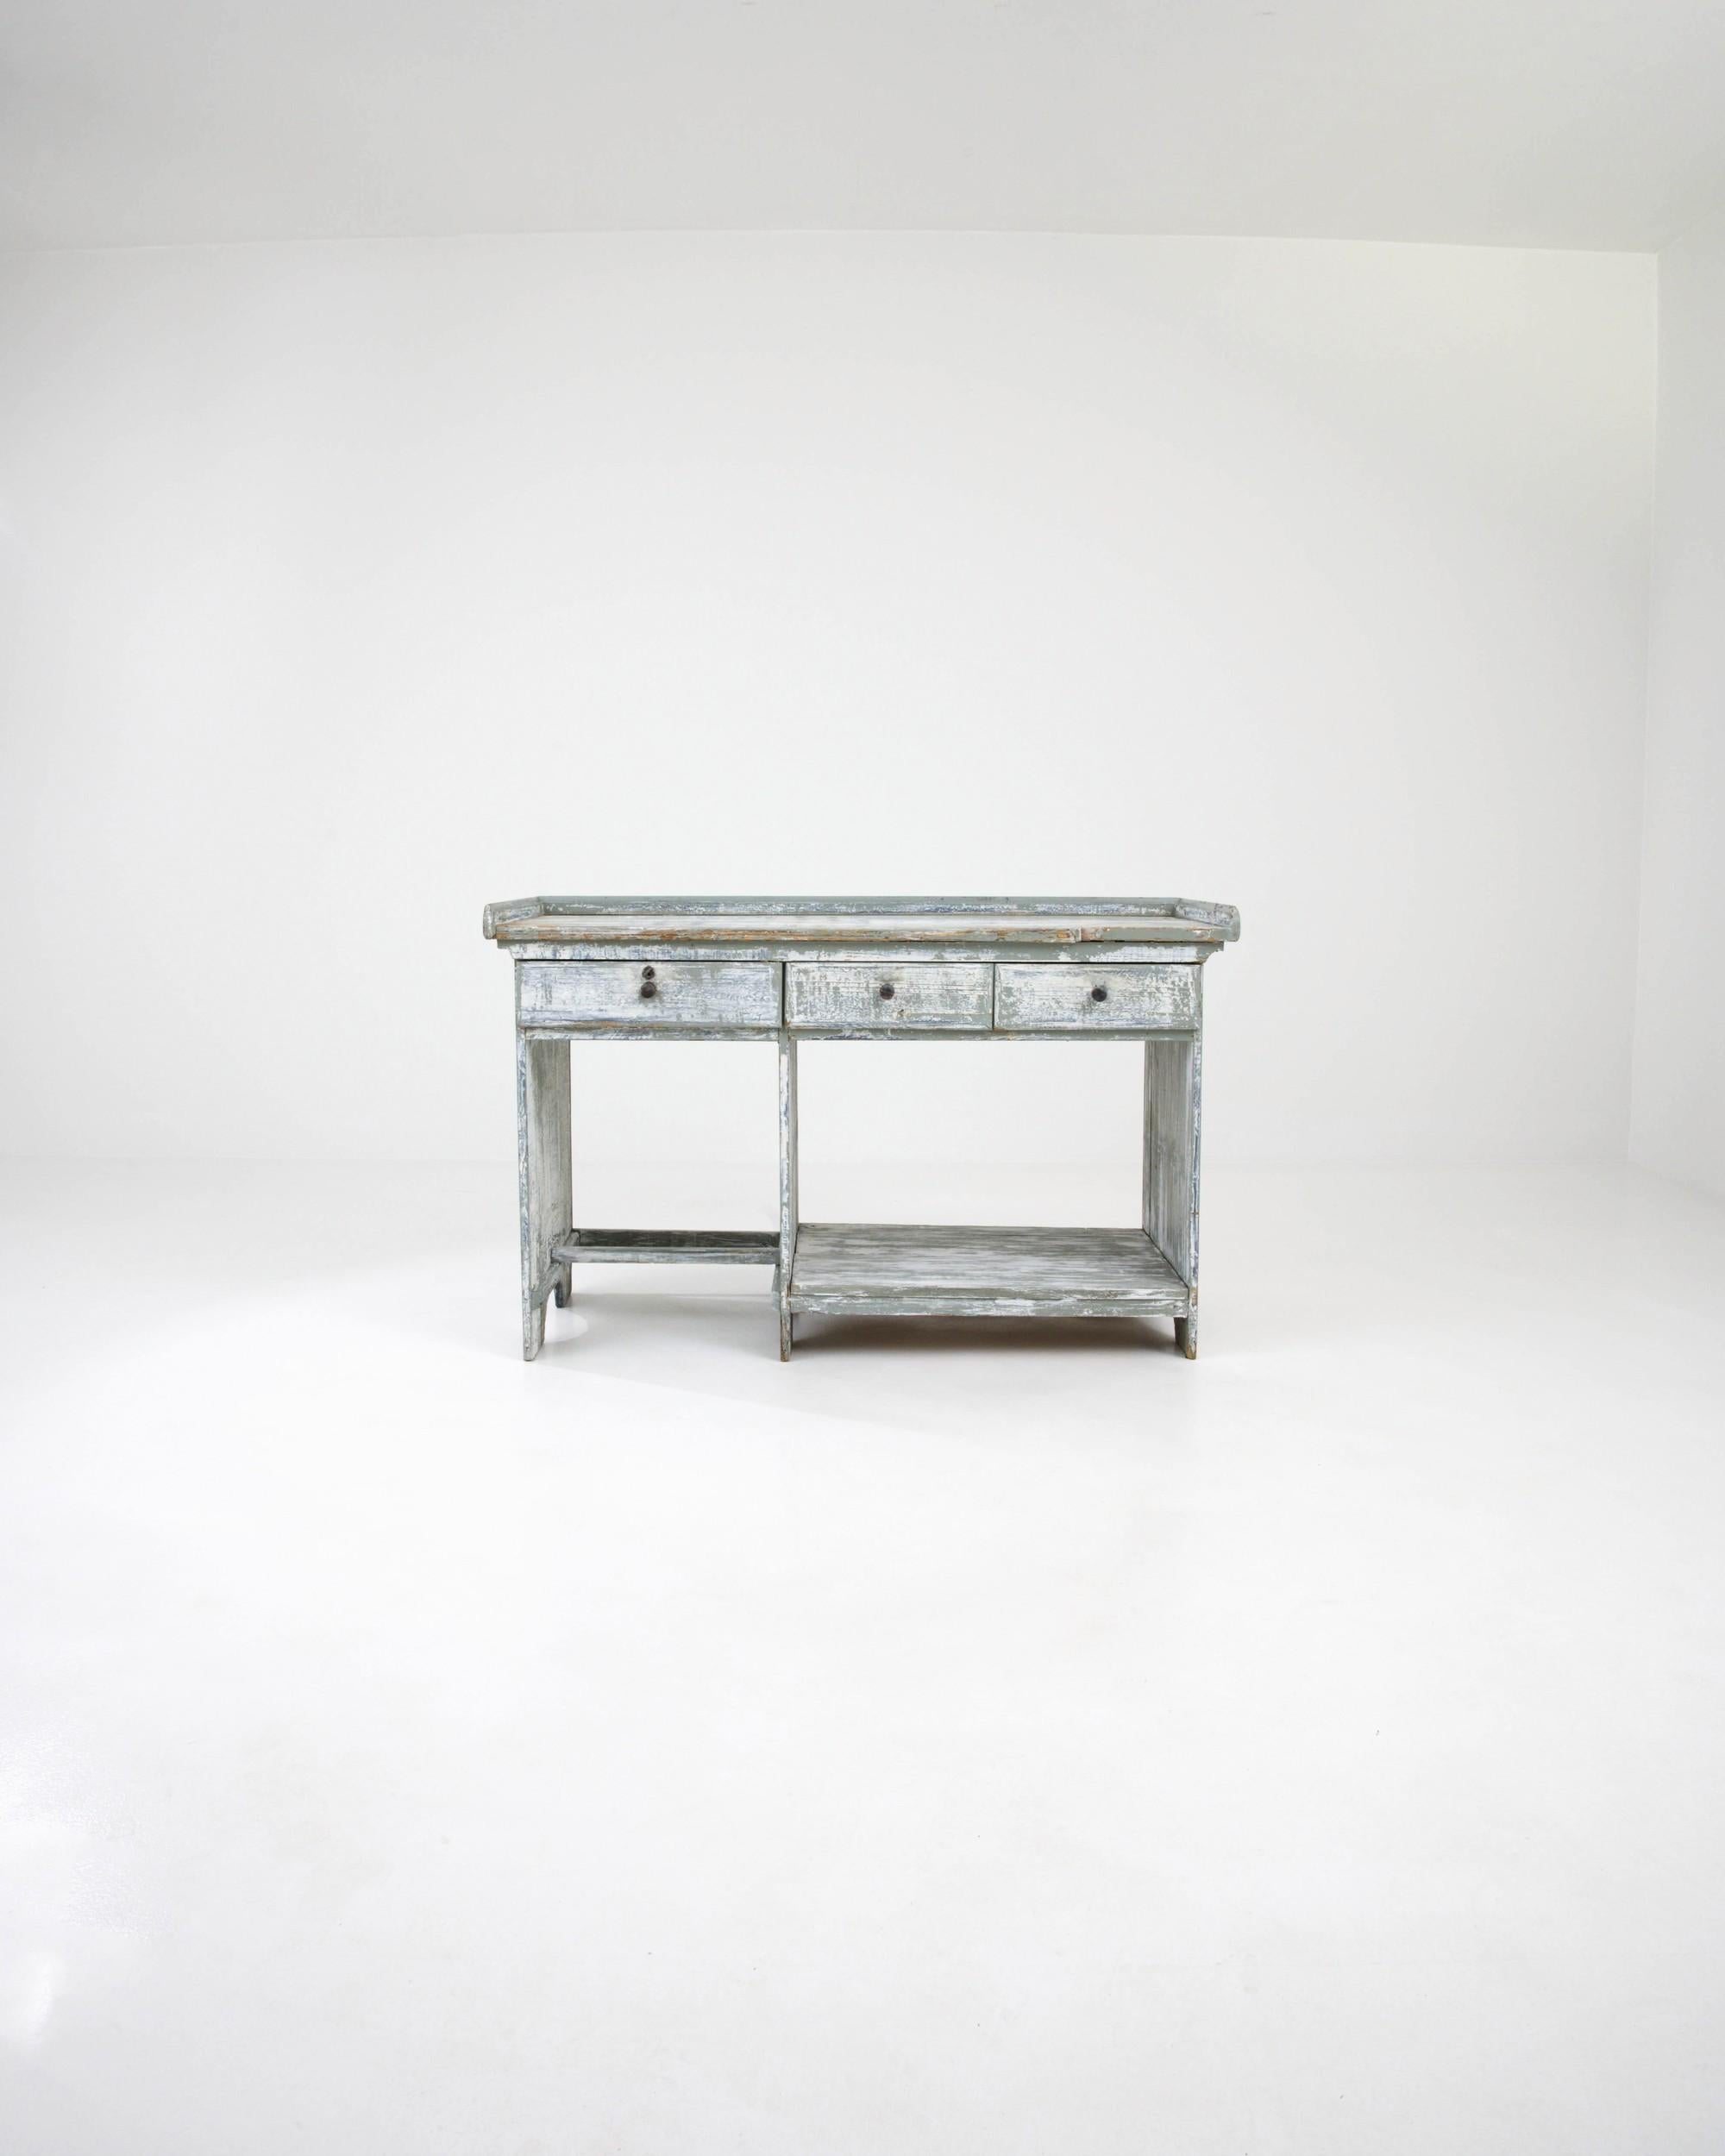 Made in France during the 19th century, this antique work table features an unusual structure with three drawers — two regular ones and one tip-out drawer — suspended above a lower shelf and kneehole desk, to keep specialized tools and materials